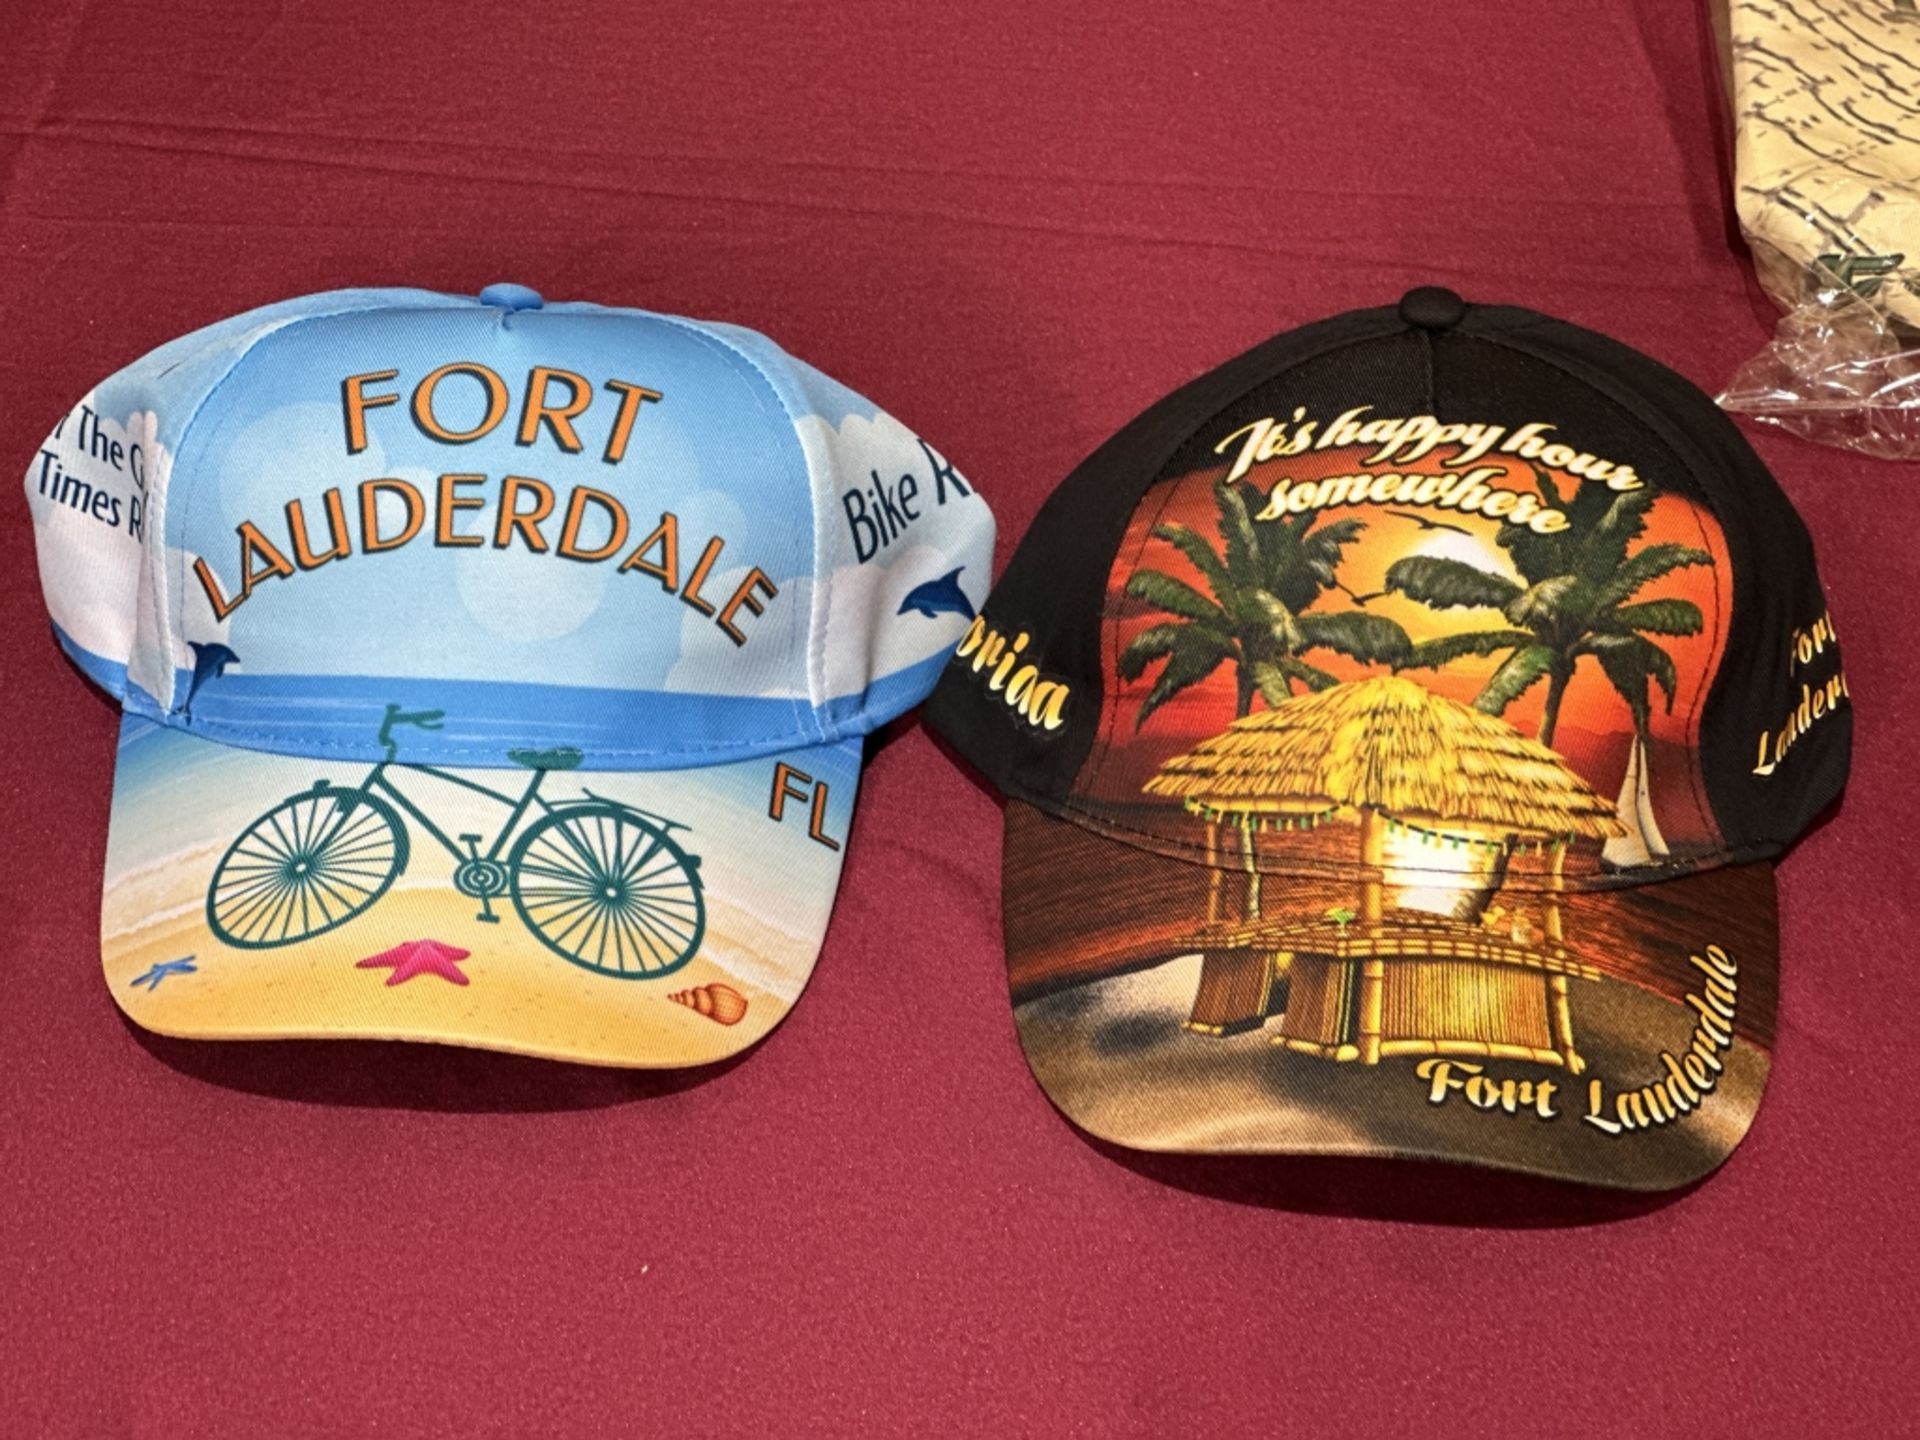 LOT CONSISTING OF ASSORTED BEACH-THEMED SOUVENIRS - Image 5 of 6